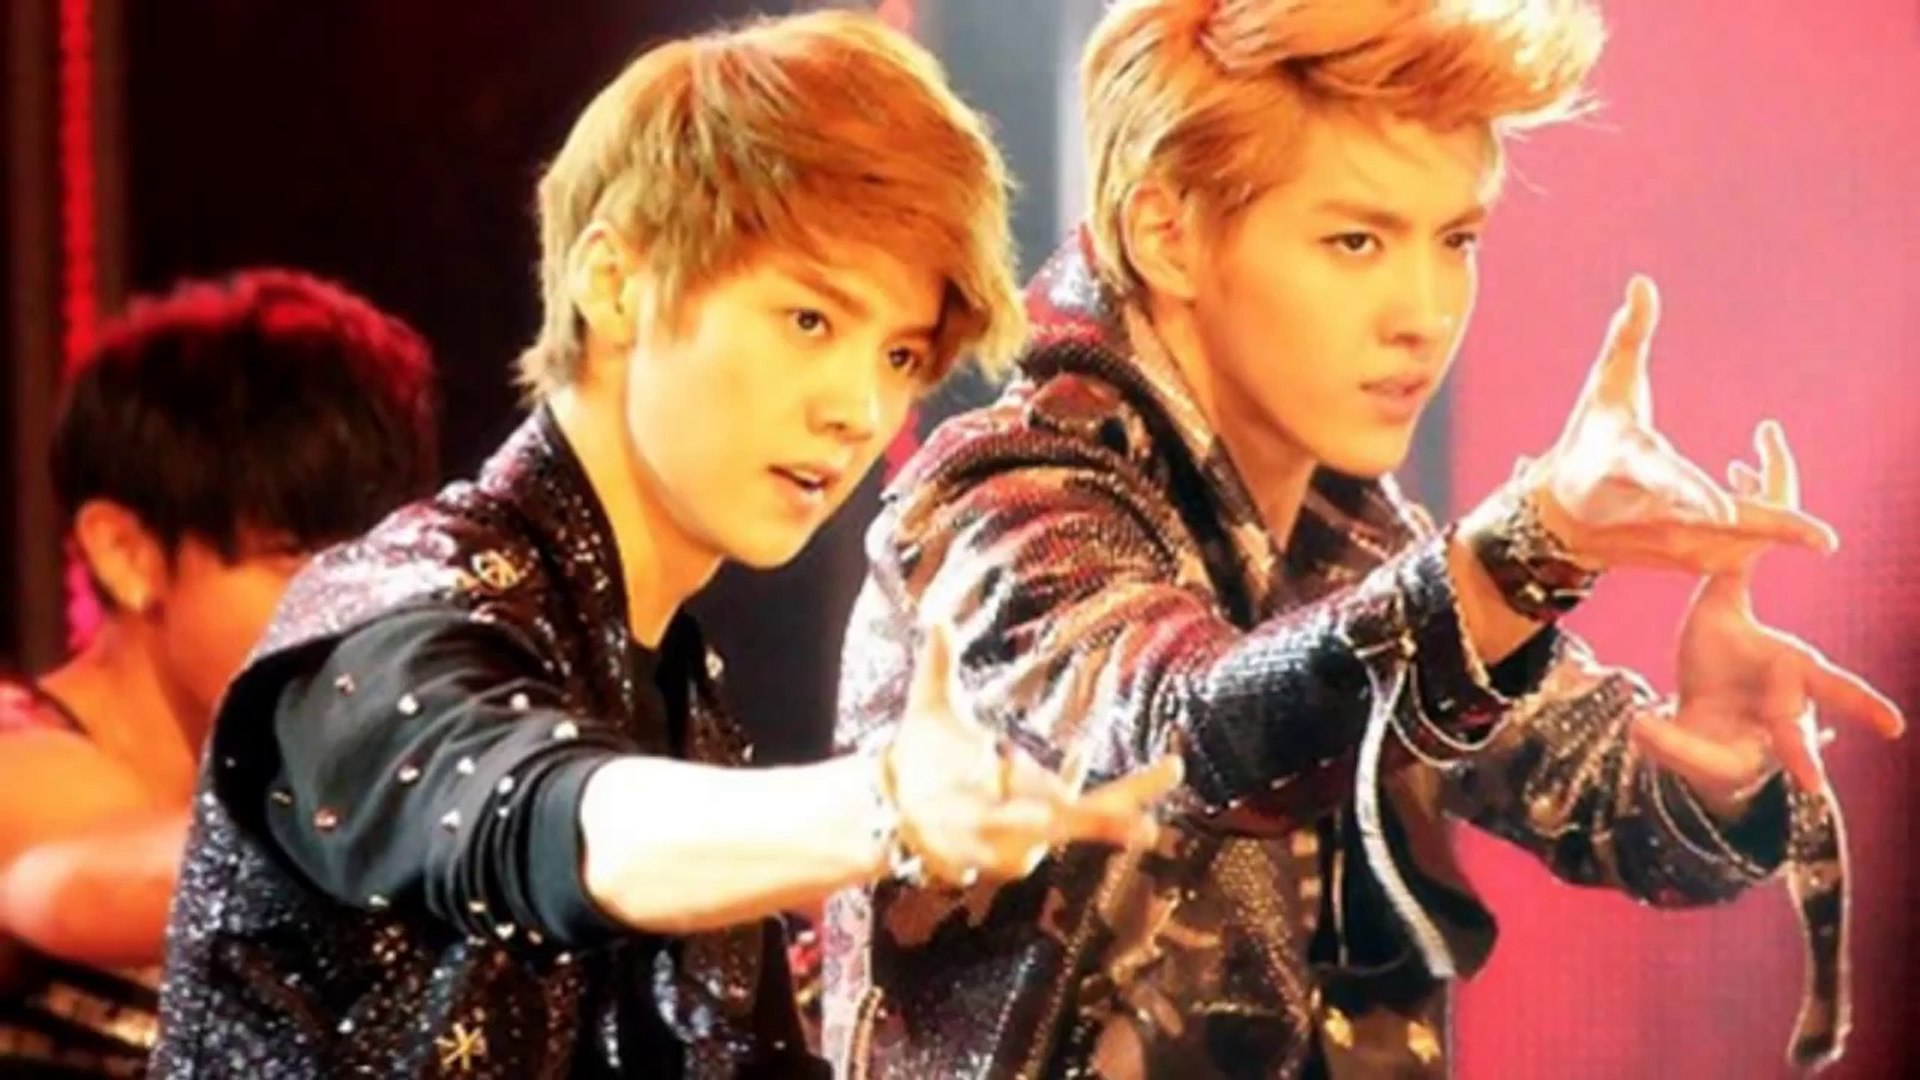 Kris & Luhan - Everything About You - YouTube